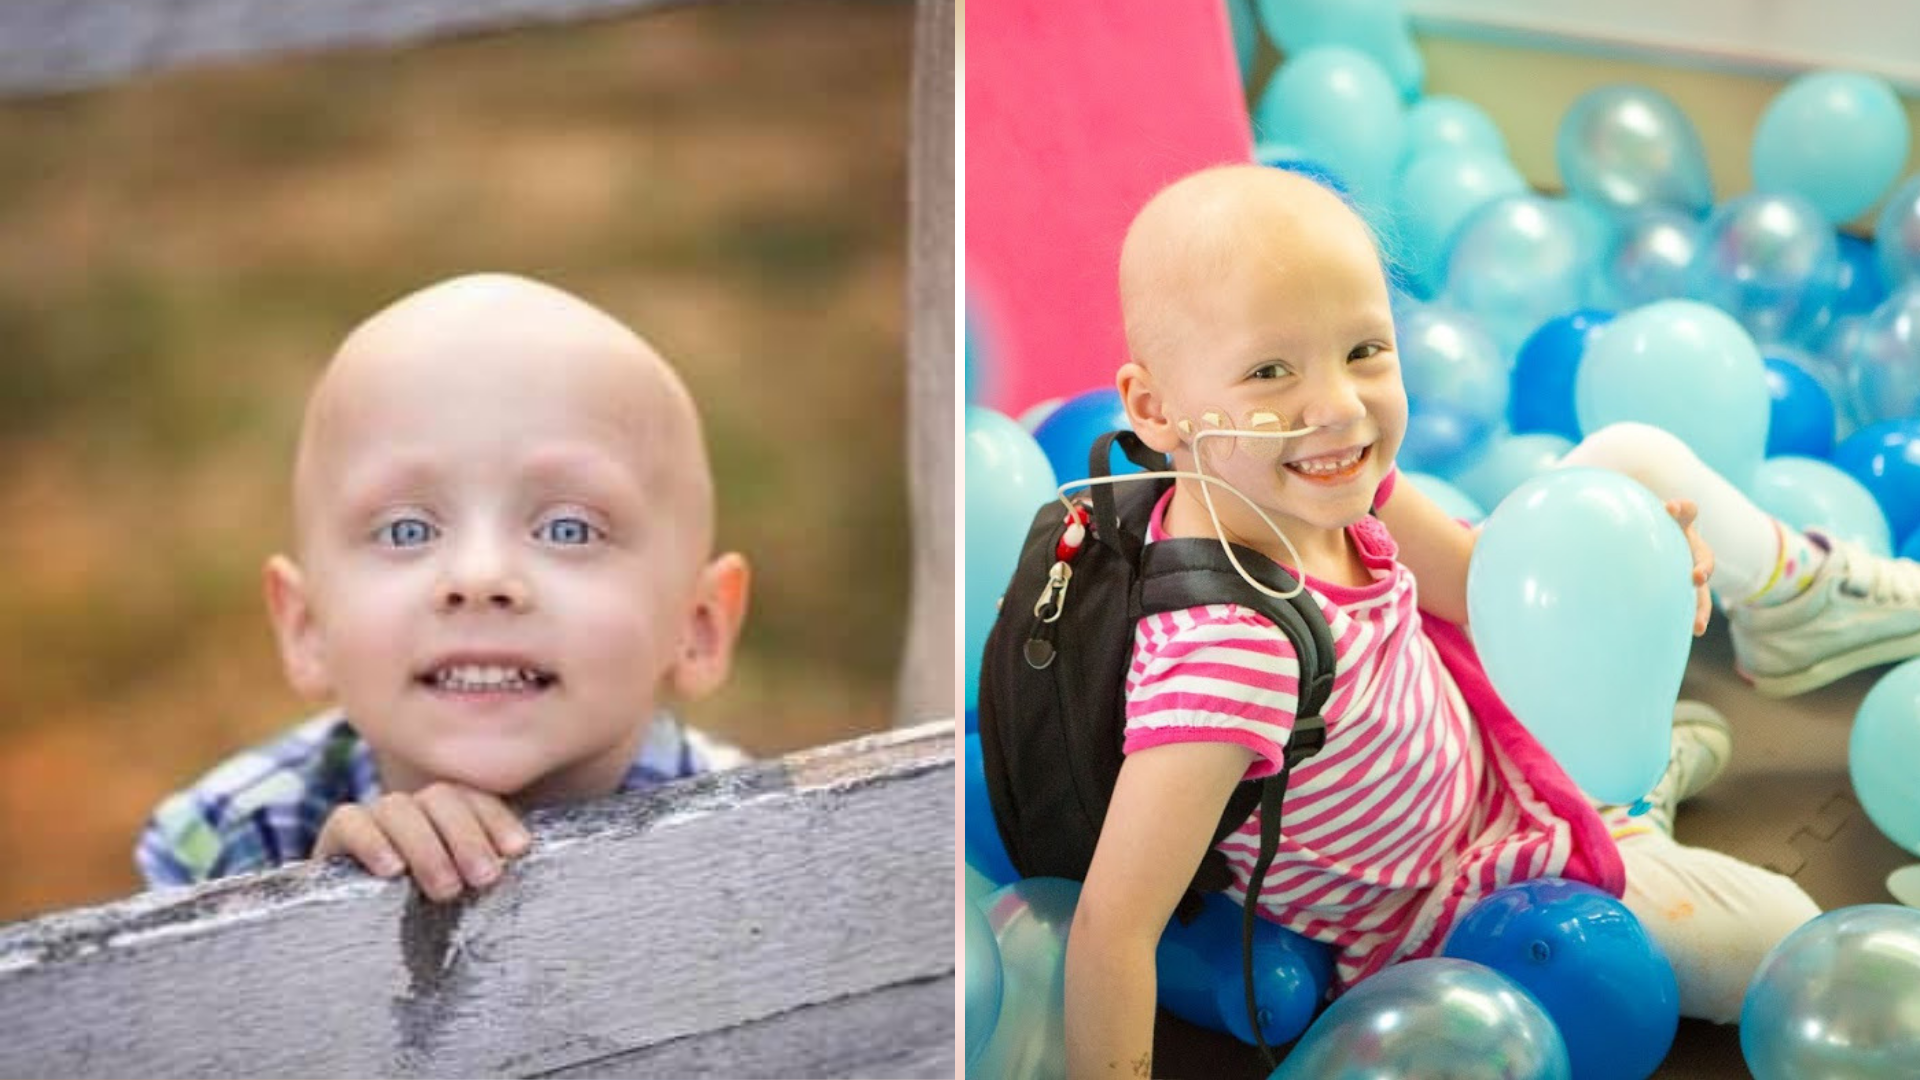 Mom Christine O’Connell started an ambitious fundraiser to help kids like her daughter Jane become cancer-free. Sponsored by Seattle Children's.